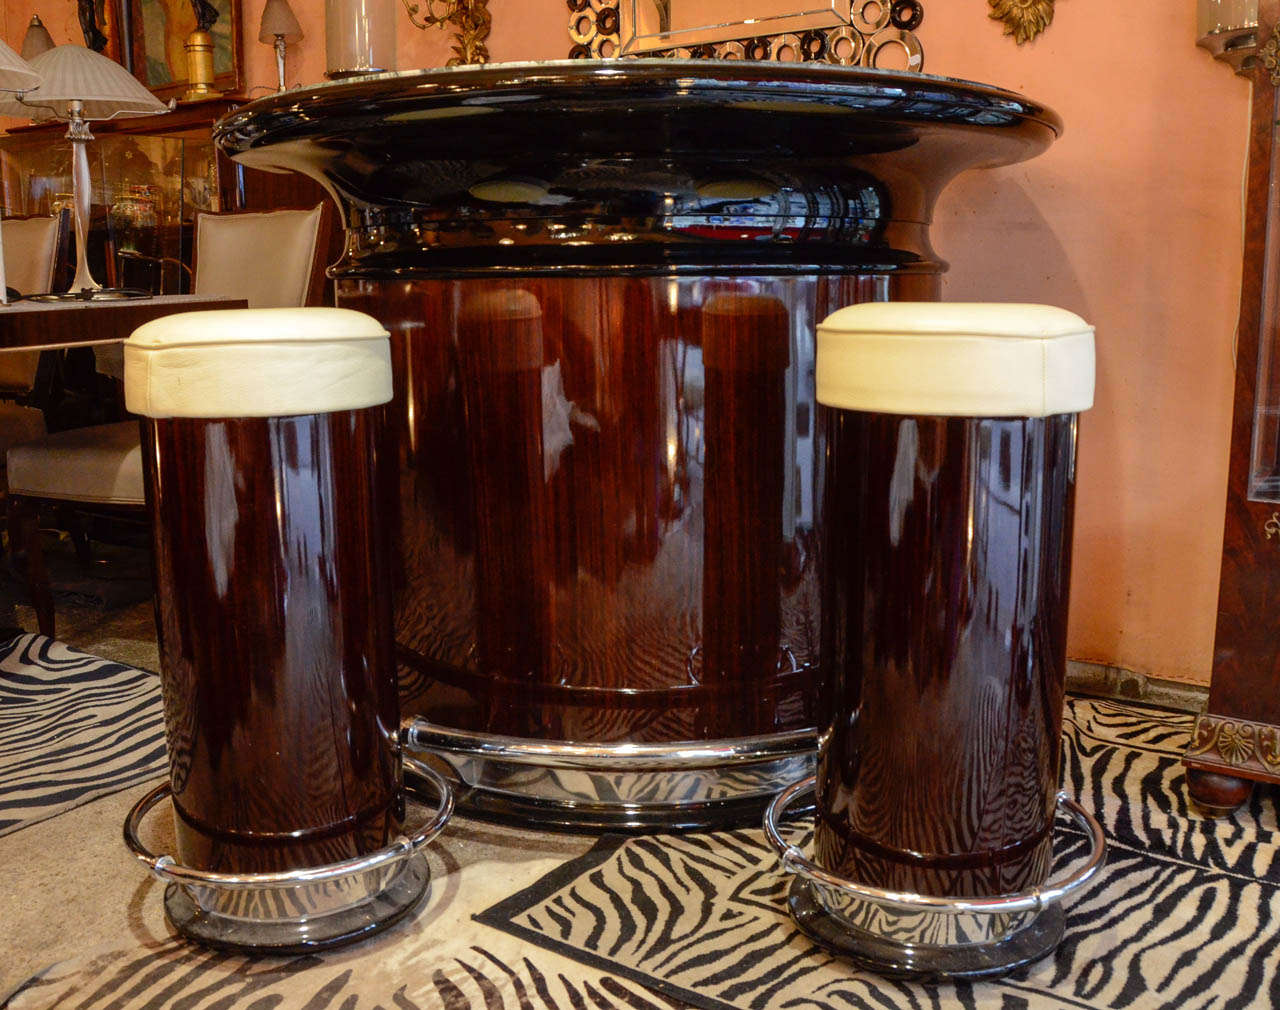 Large Art Deco style bar with a semi crescent design in Rio rosewood and black lacquer. Sea green veined marble top. Belt and foot rest in nickel plated chrome steel. Two bottle and glass crates inside. Two stools trimmed with ivory leather complete